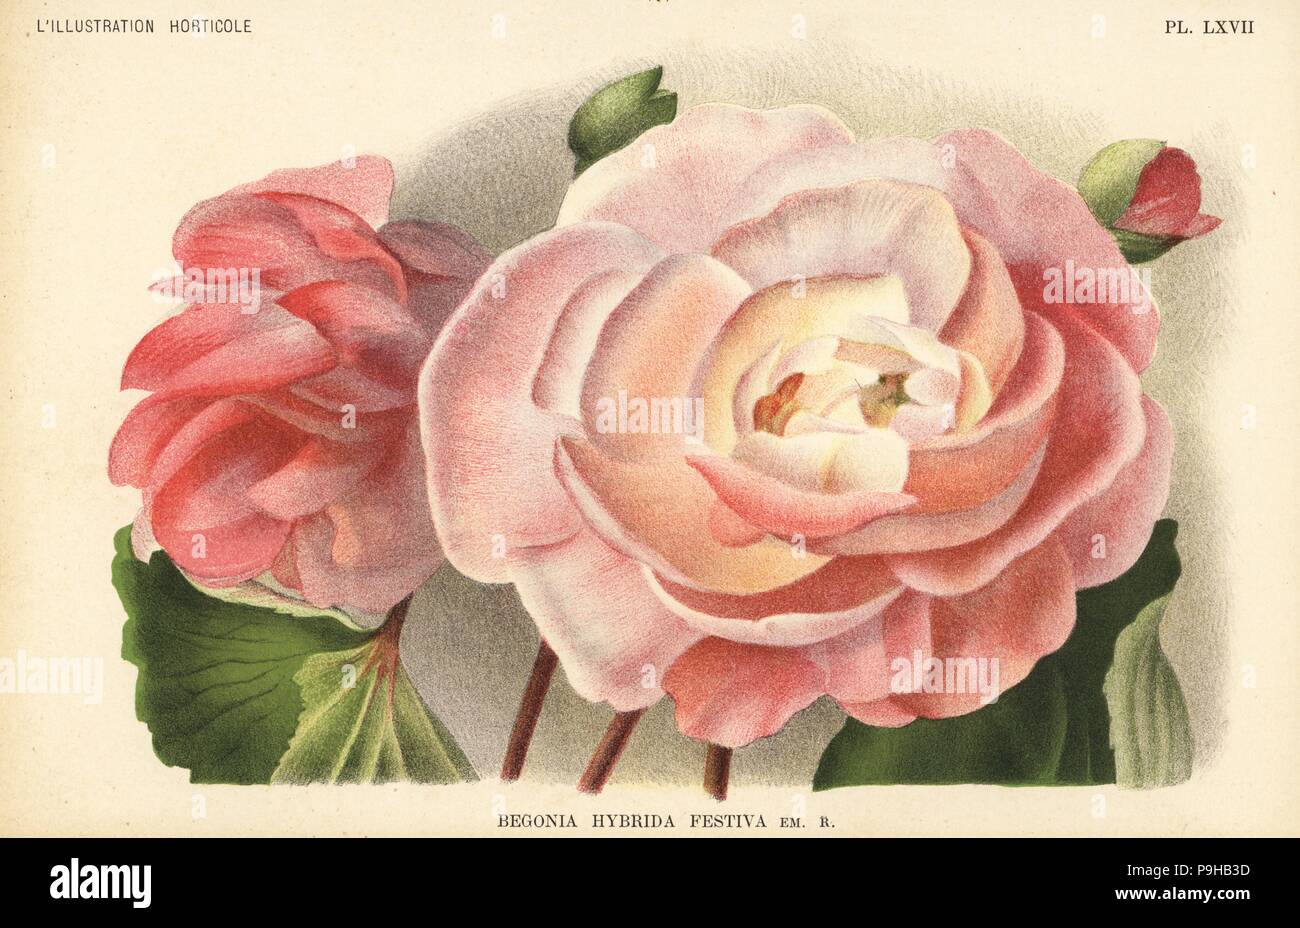 Begonia hybrid raised by F. Crousse of Nancy, Begonia hybrida festiva. Chromolithograph by Pieter de Pannemaeker after an illustration by J. de Bosschere from Jean Linden's l'Illustration Horticole, Brussels, 1896. Stock Photo